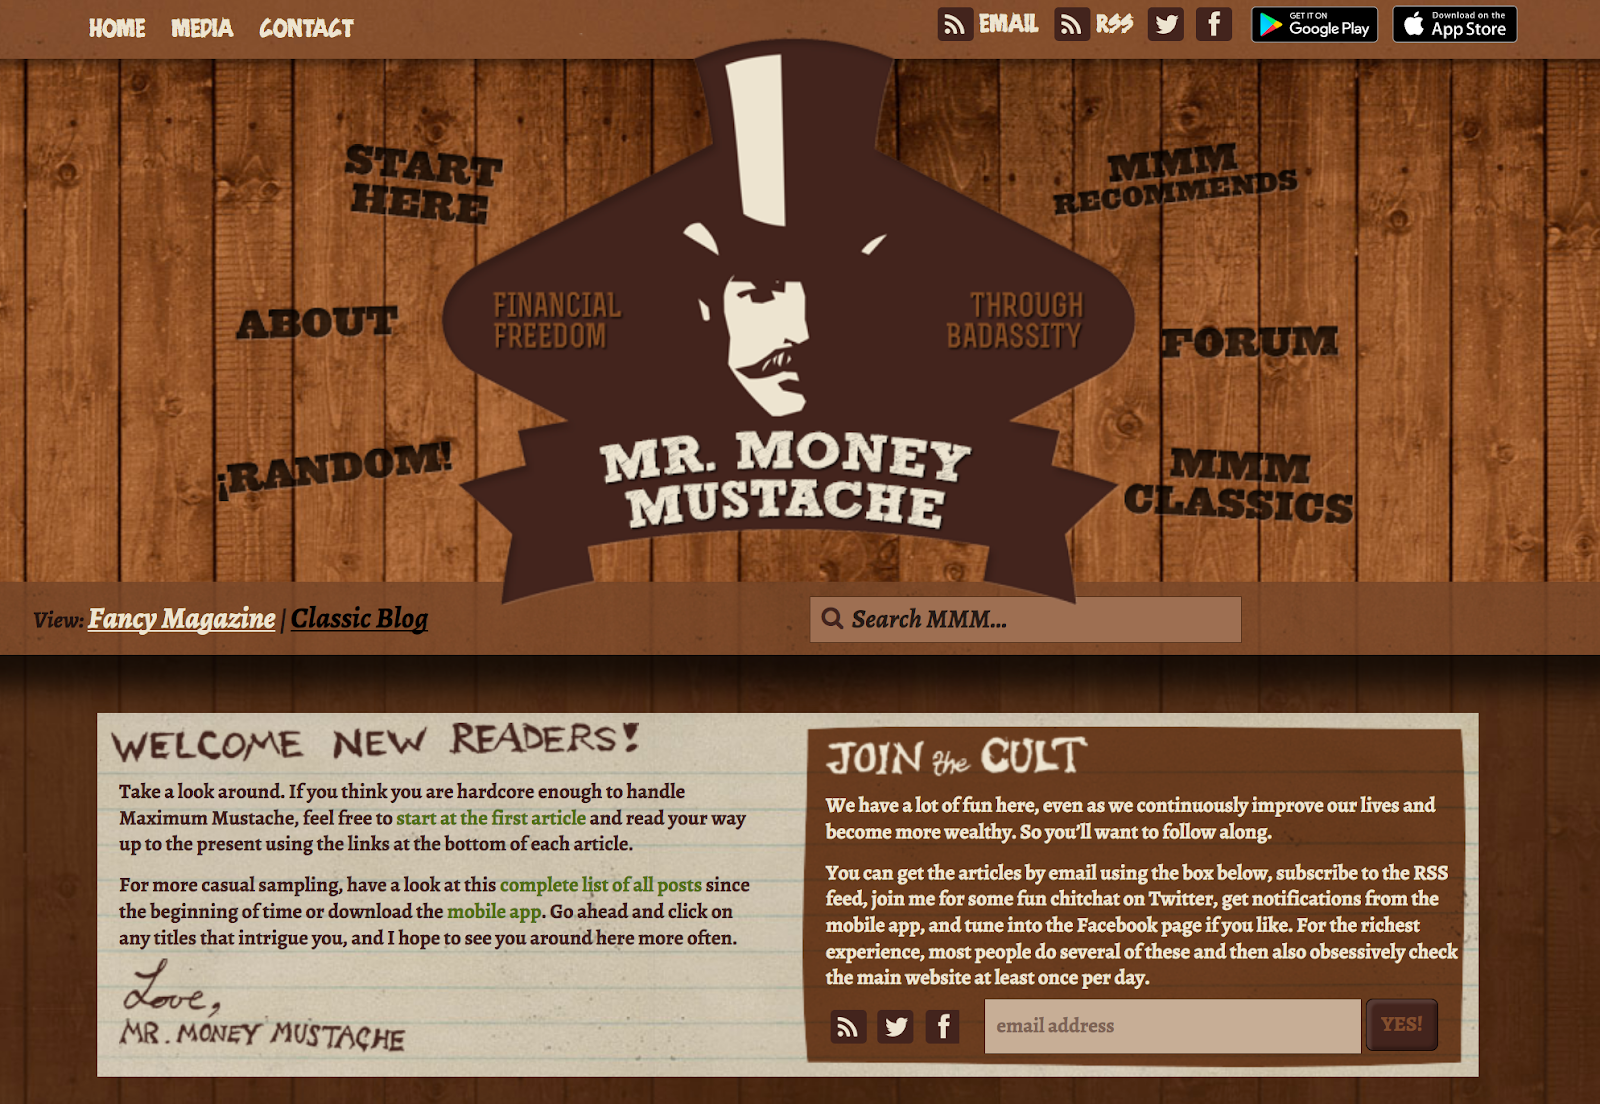 Mr. Money Mustache blog homepage. An example of a great online business idea.